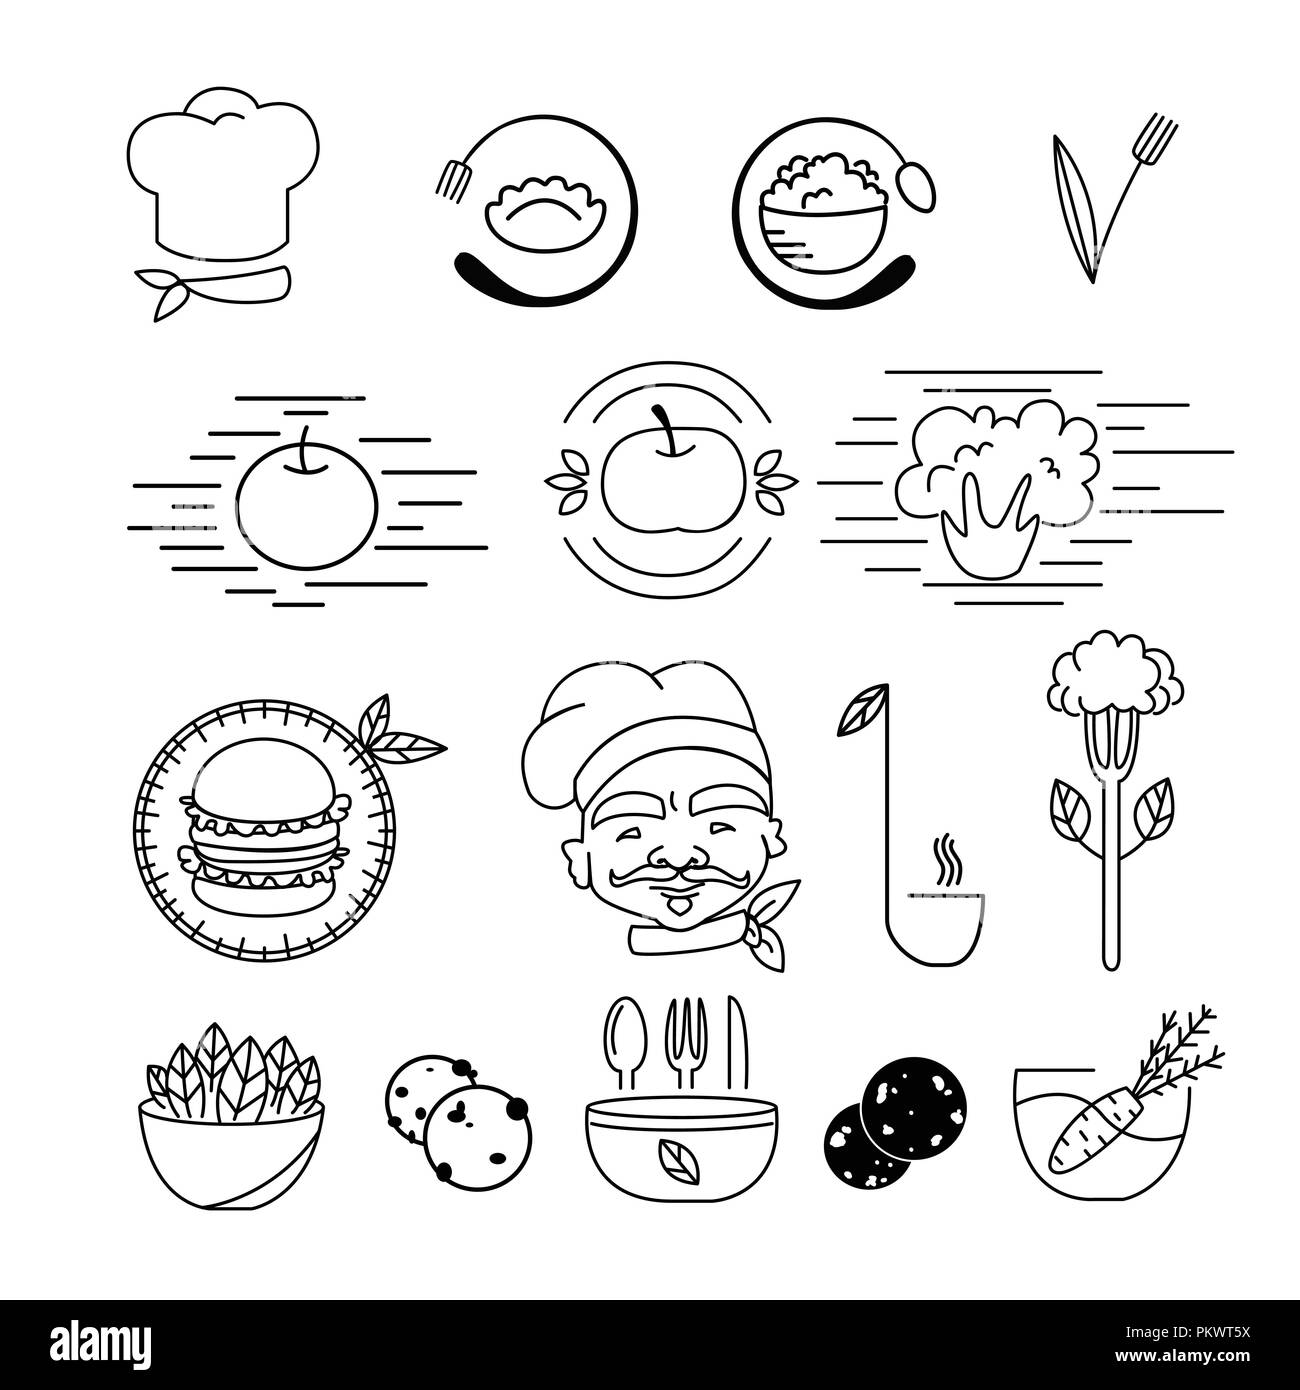 Vegetarian food logo elements. Vegan cooking symbols with fruits and vegetables for design or idea of logo. Stock Vector